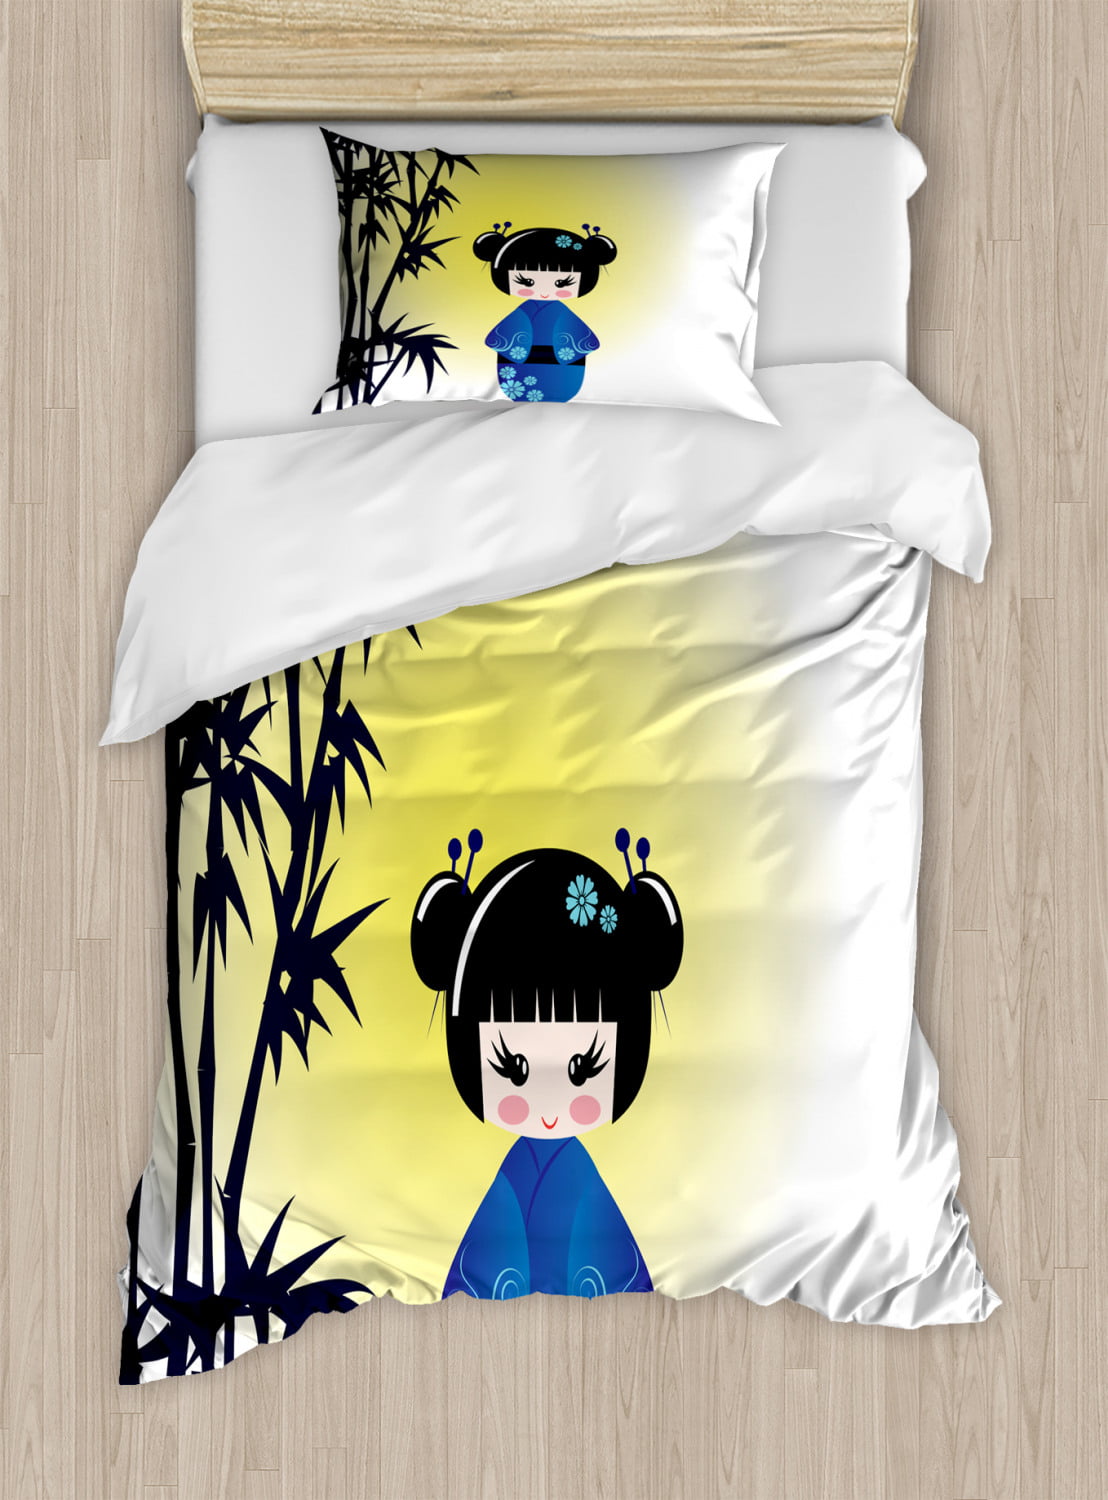 Bendy And The Ink Machine 3D Bedding Set Game Cartoon Twin King Duvet Cover Set 